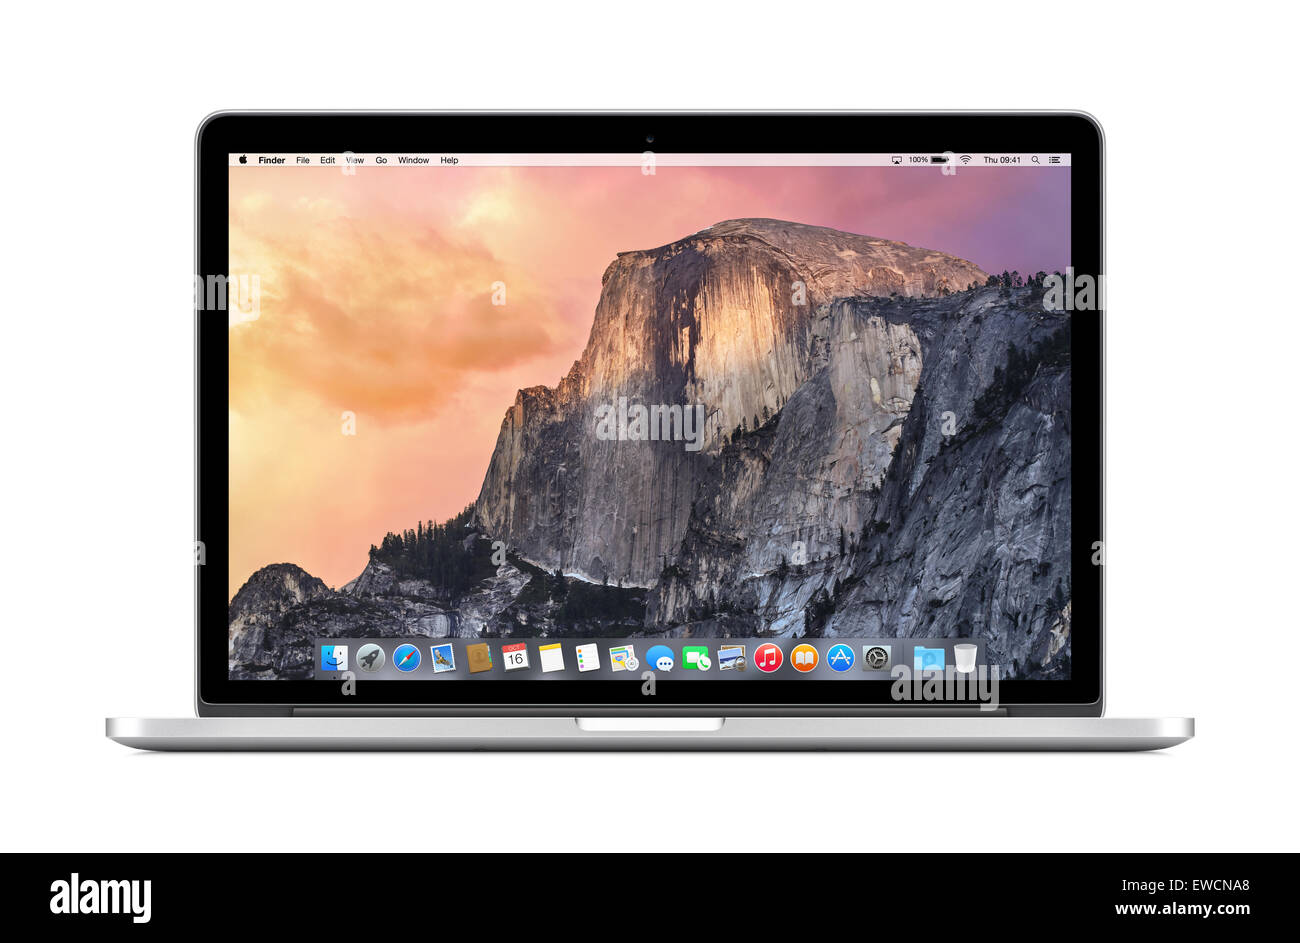 Varna, Bulgaria - November 03, 2013: Directly front view of Apple 15 inch MacBook Pro Retina with OS X Yosemite on the display. Stock Photo